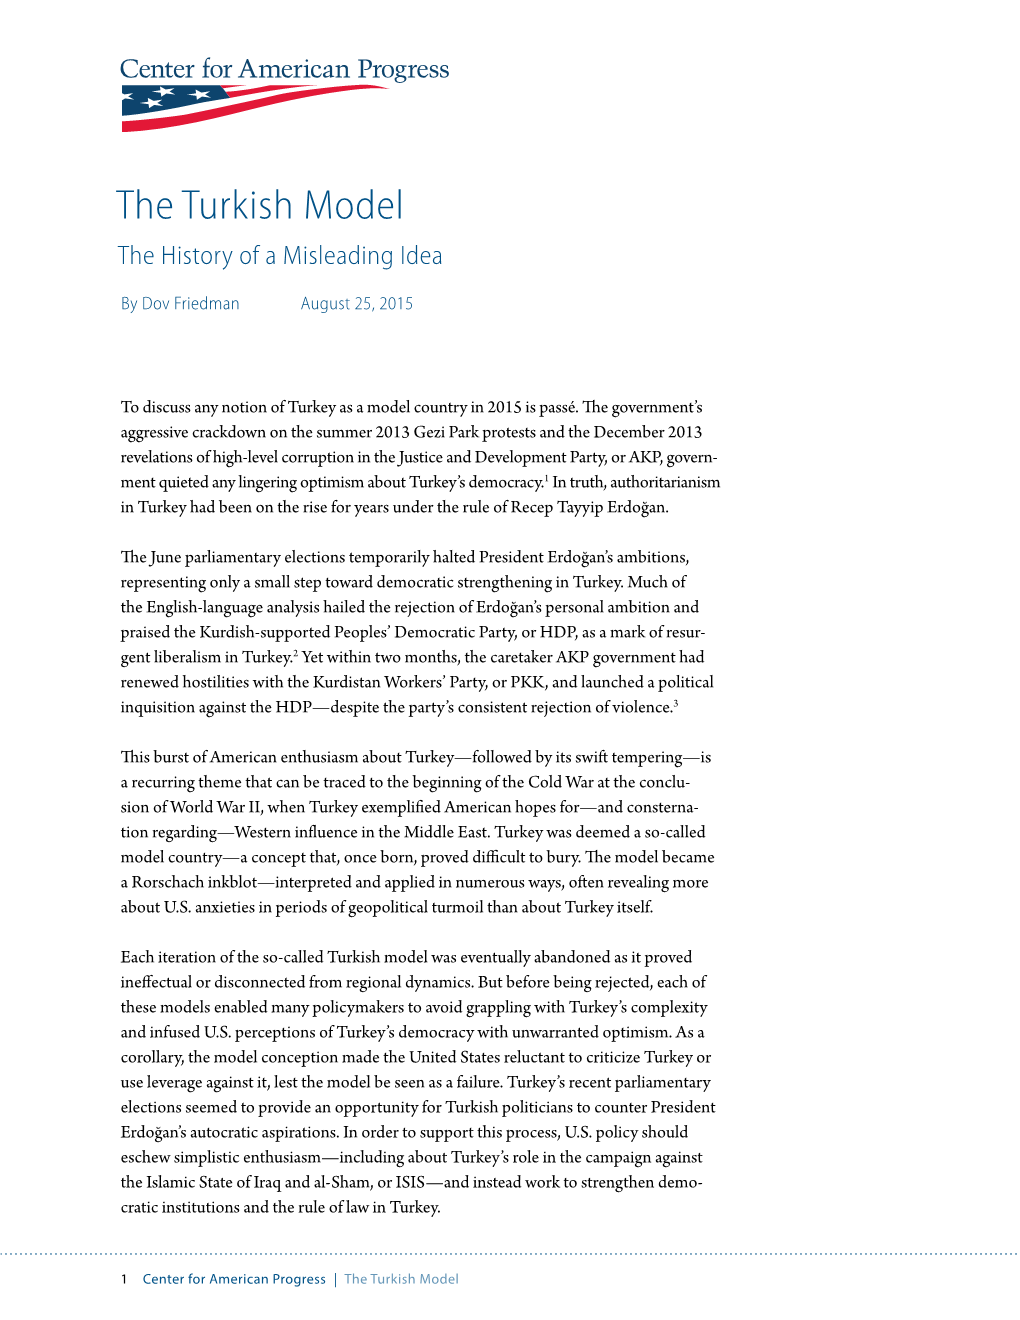 The Turkish Model the History of a Misleading Idea